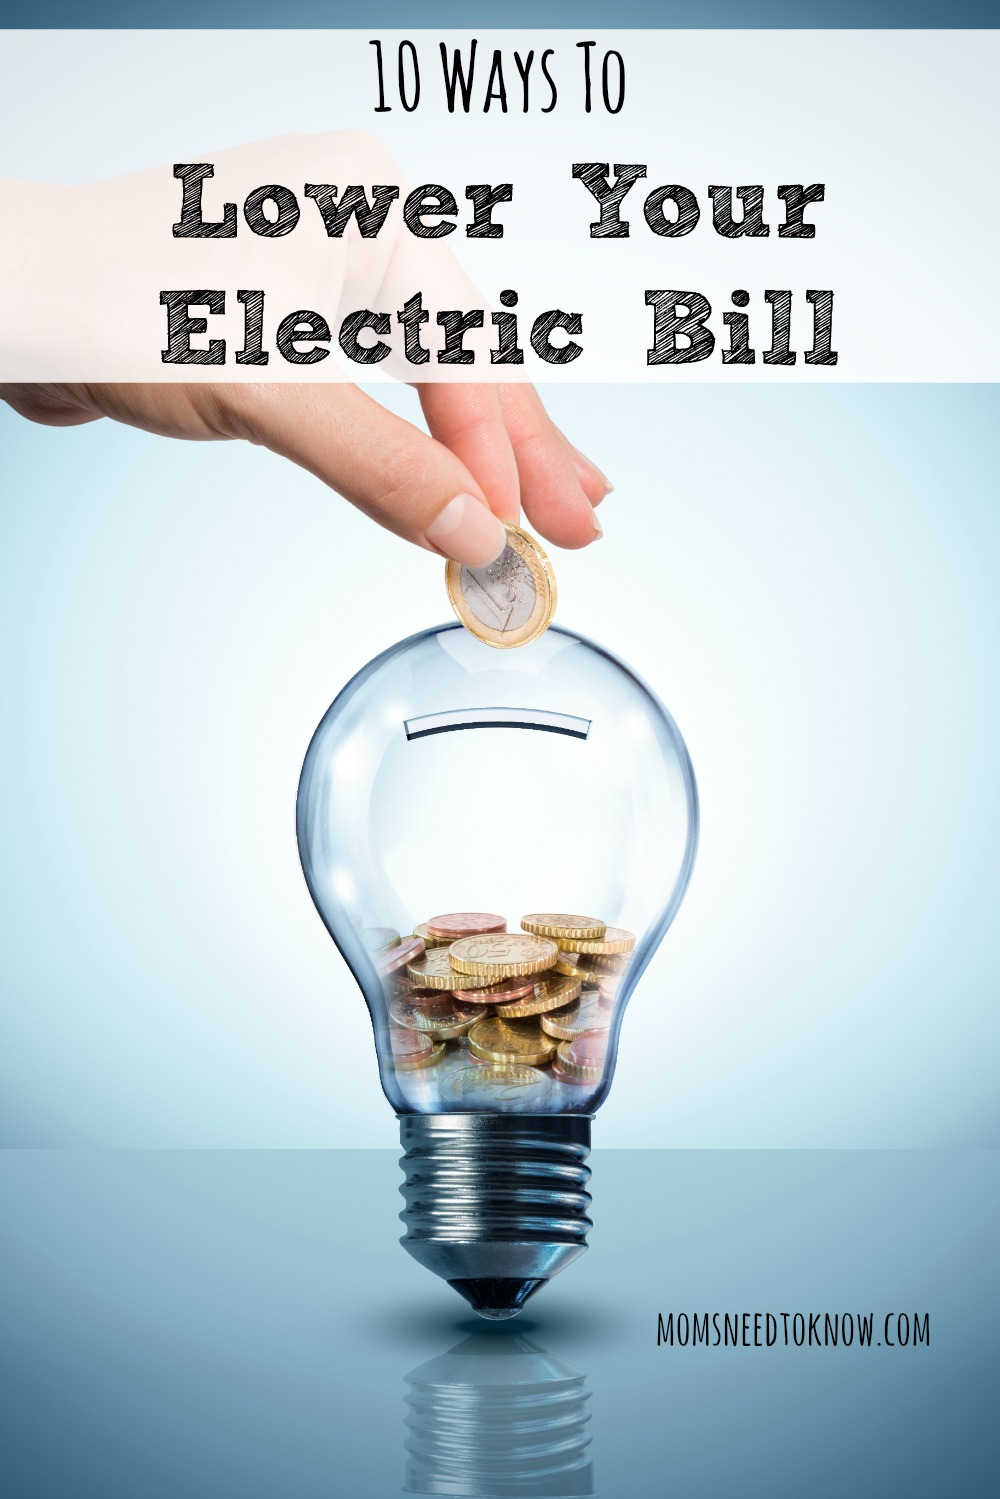 10 Ways To Lower Your Electric Bill